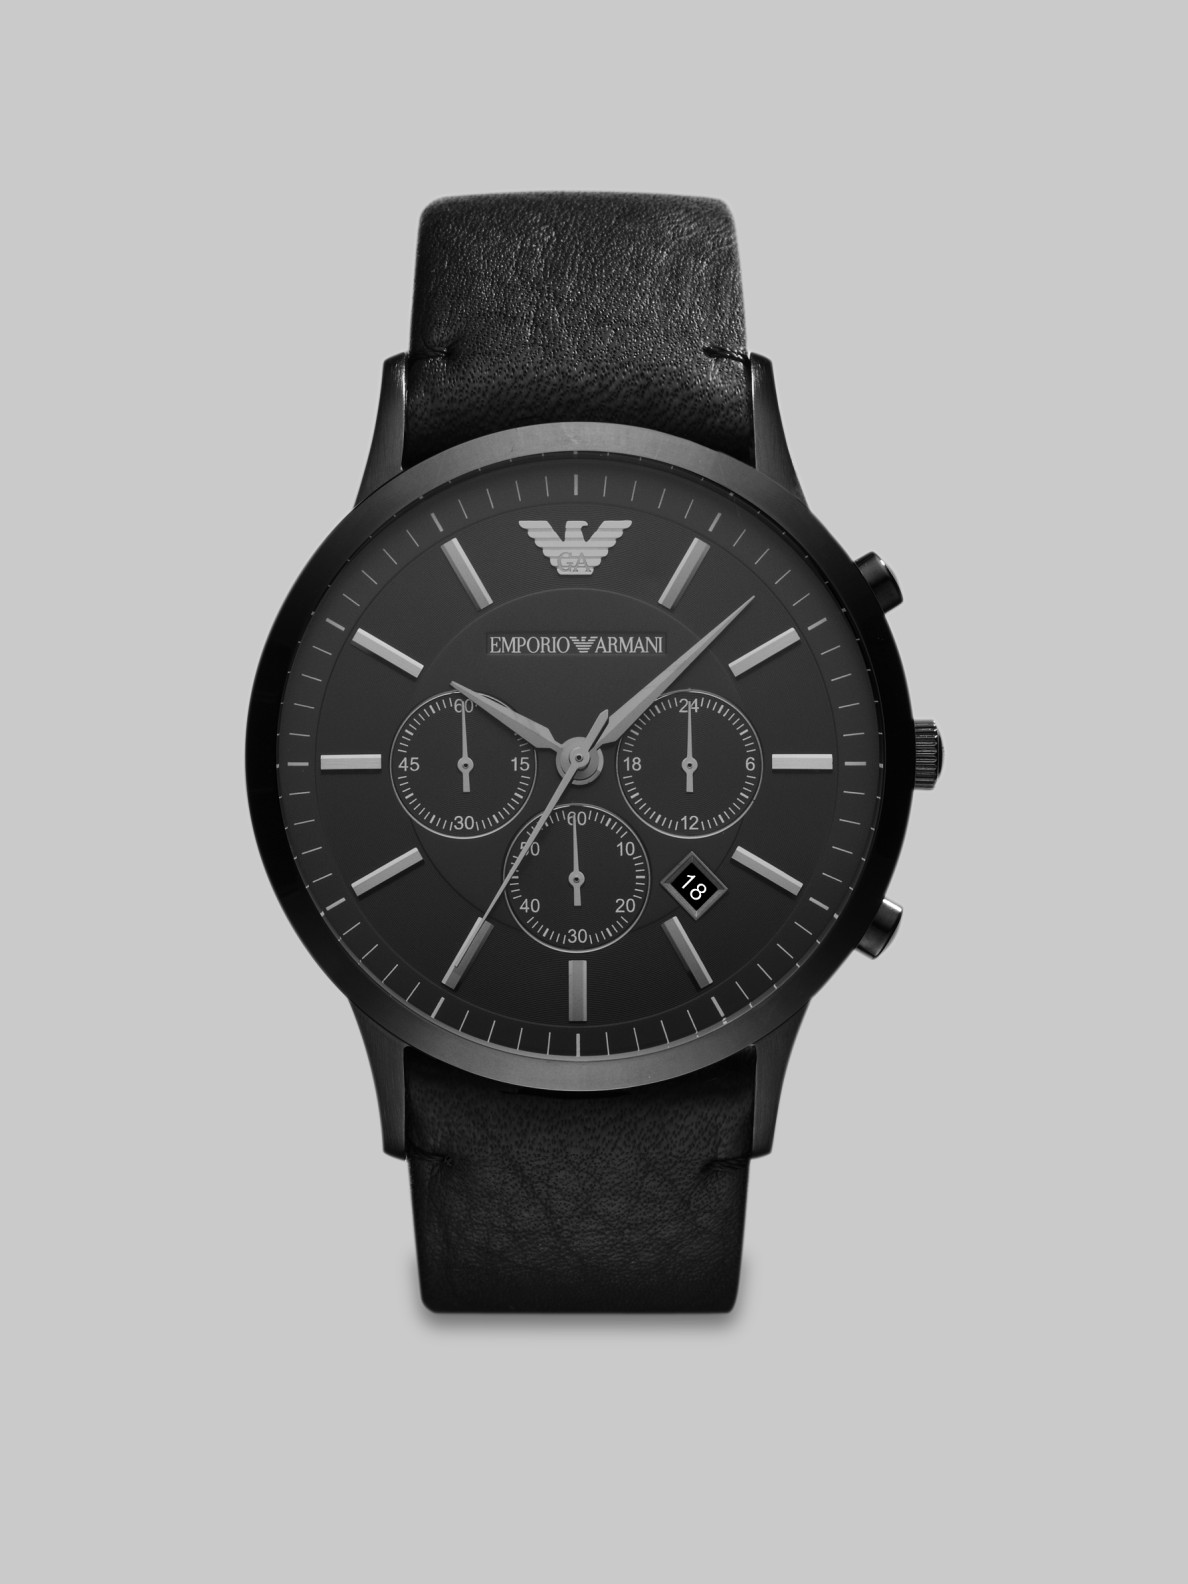 Emporio Armani Leather Chronograph Watch in Black for Men - Lyst